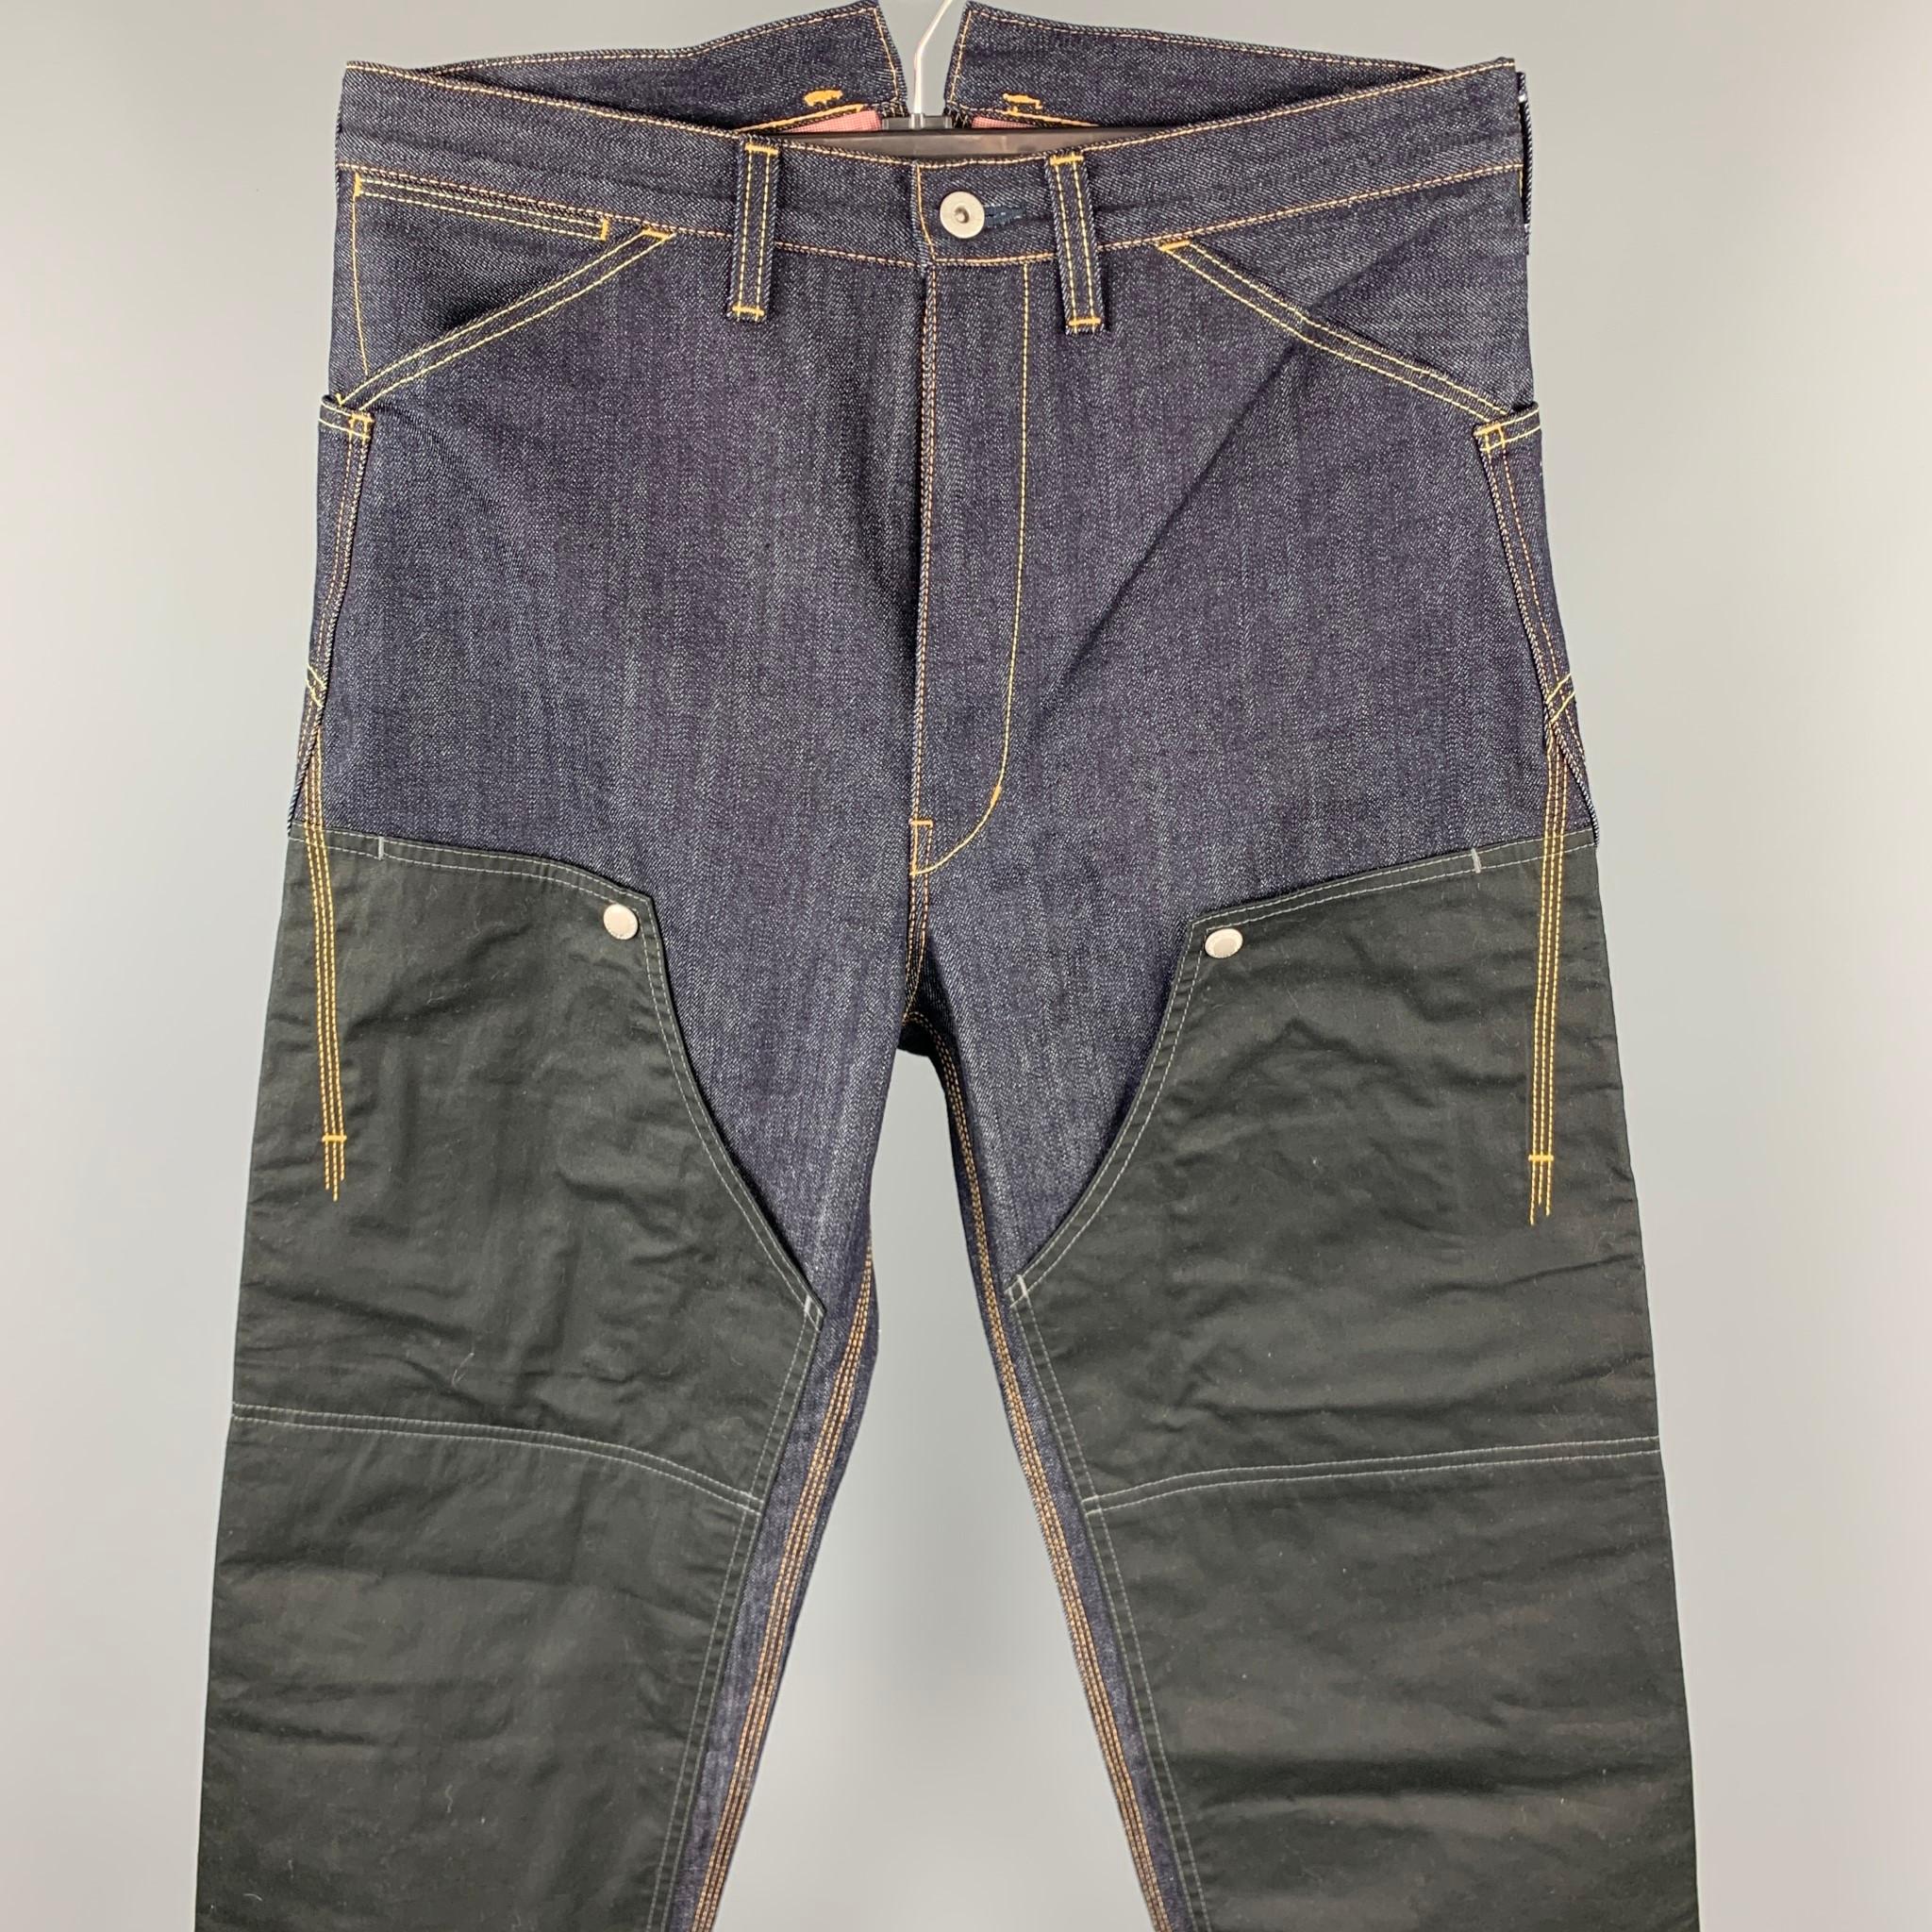 JUNYA WATANABE jeans comes in a indigo denim featuring mixed material patchwork designs featuring front pockets, snap button details, contrast stitching, and a zip fly closure. Made in Japan. 

Excellent Pre-Owned Condition.
Marked: M /